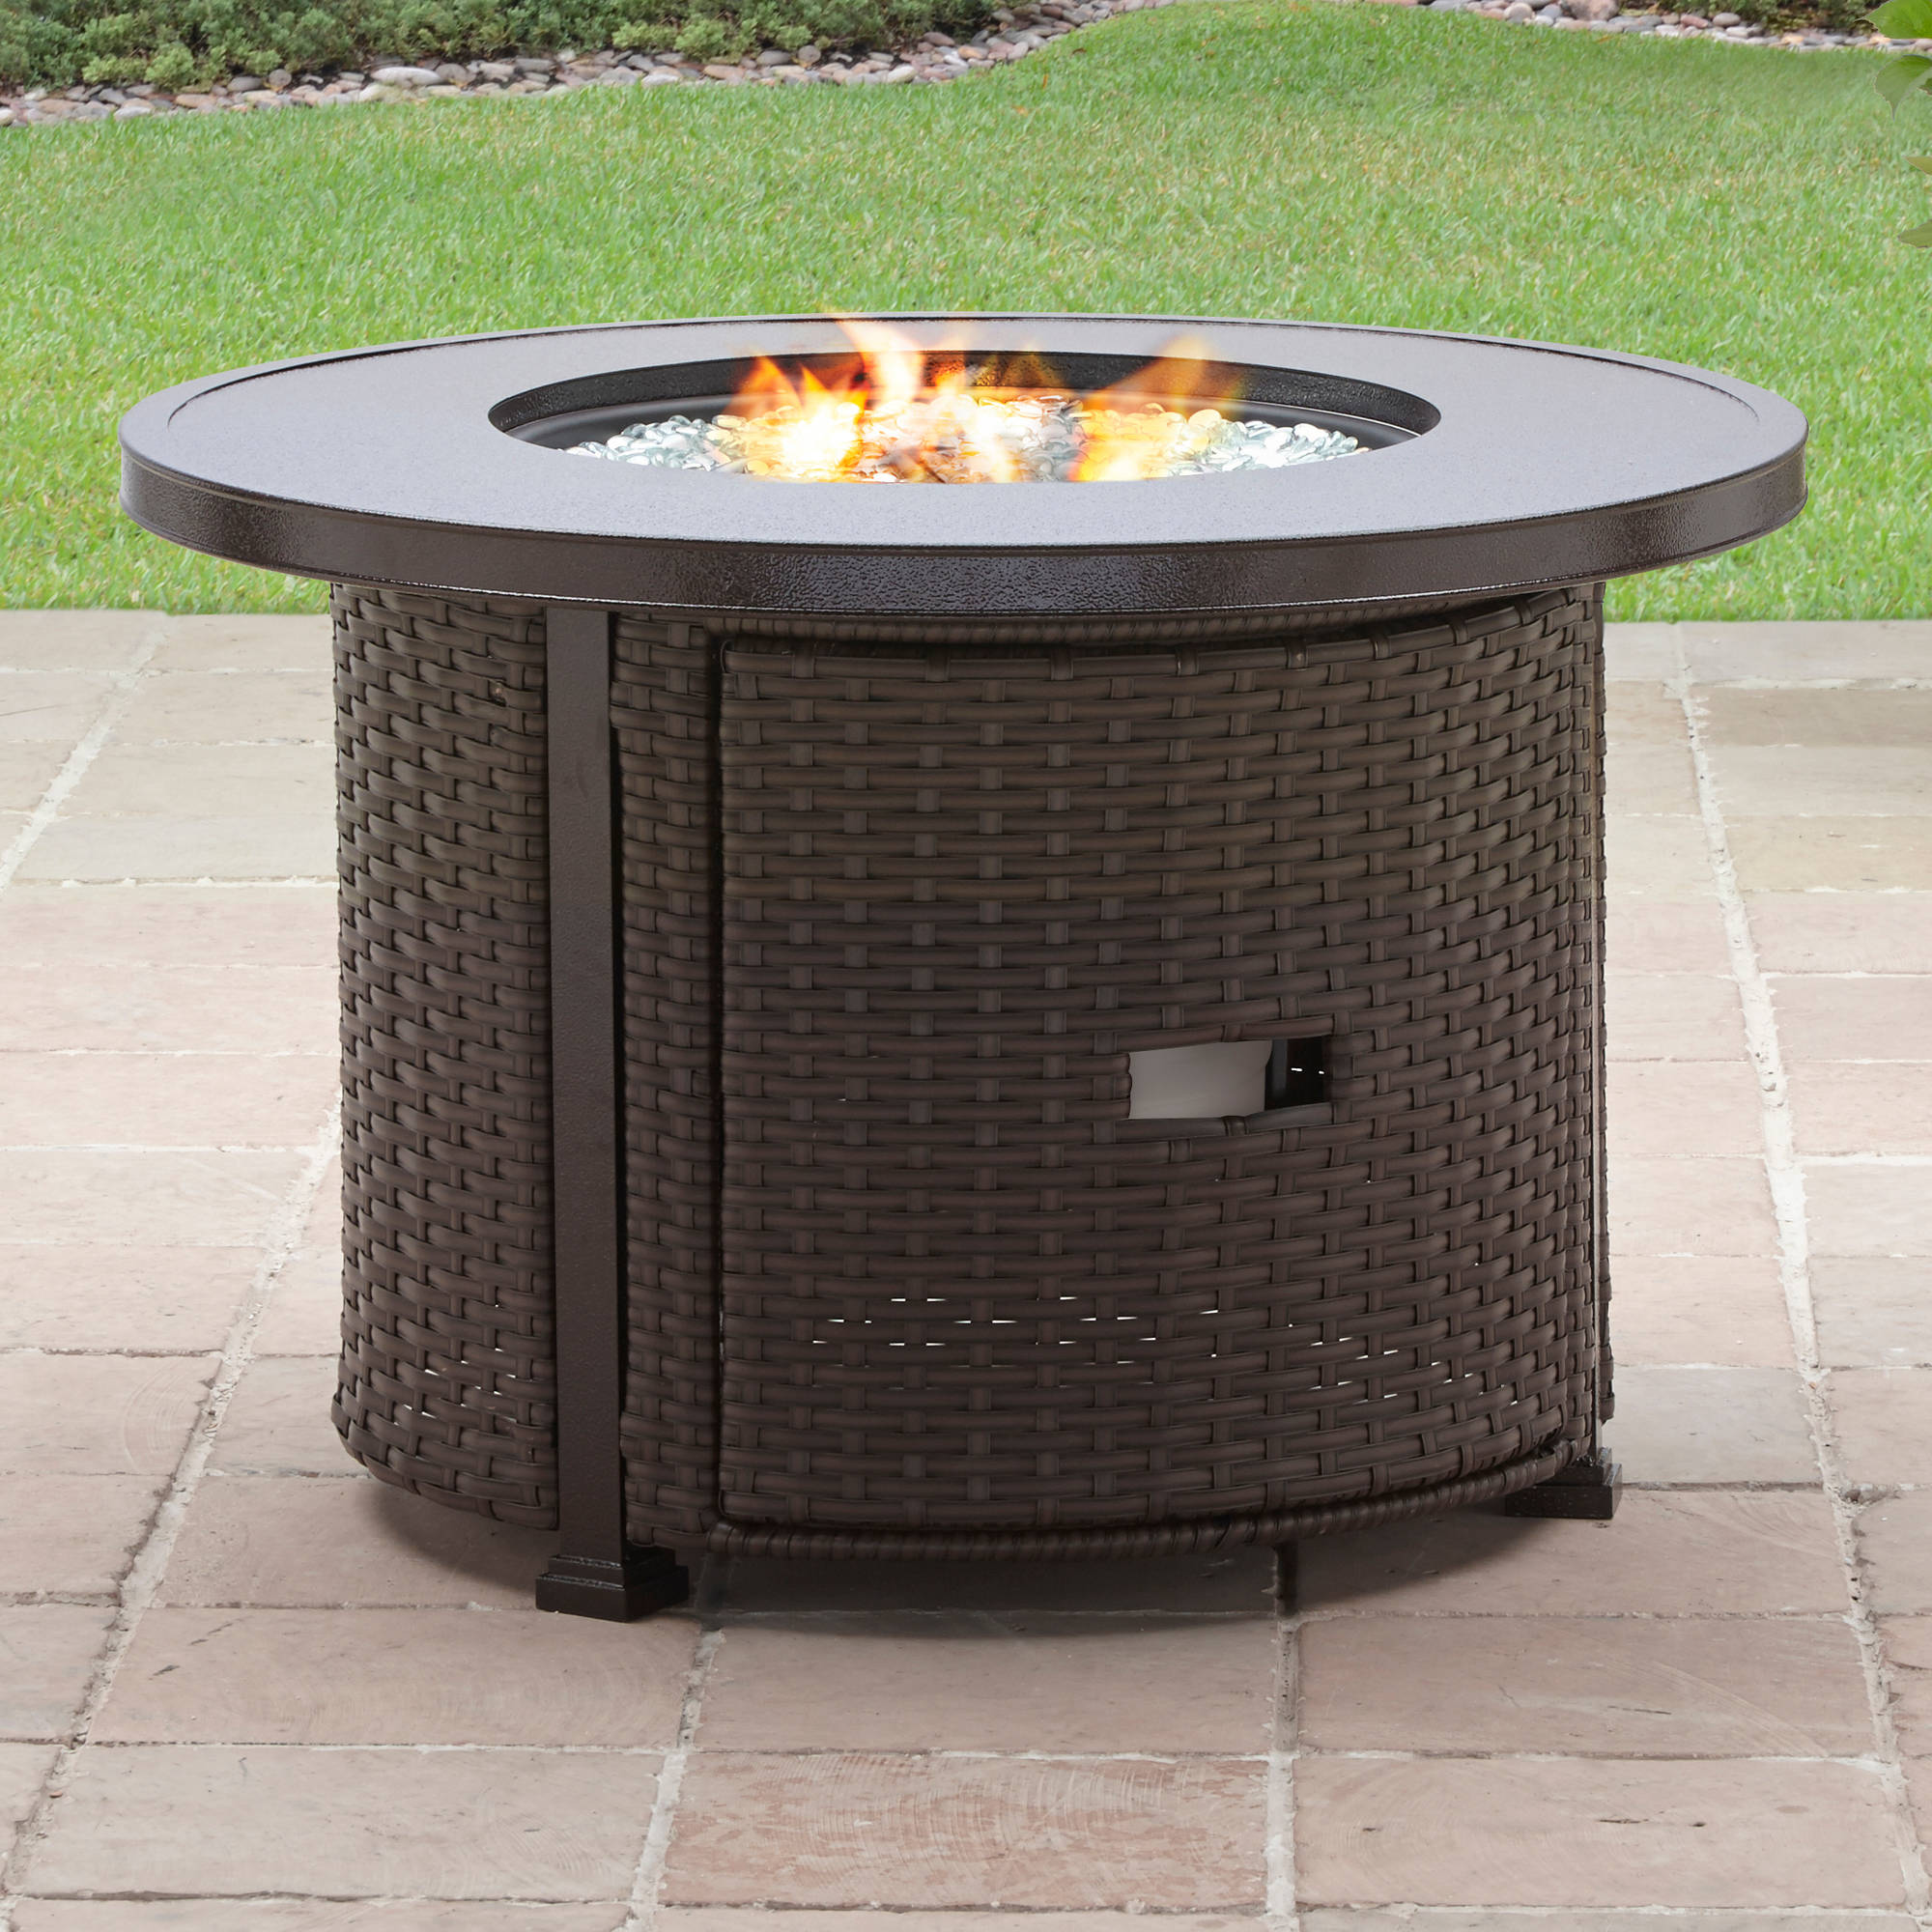 Better Homes & Gardens Colebrooke 37" Round 50,000 BTU Propane Gas Fire Pit Table with Glass Beads, Metal Lid and Protective Cover - image 1 of 14